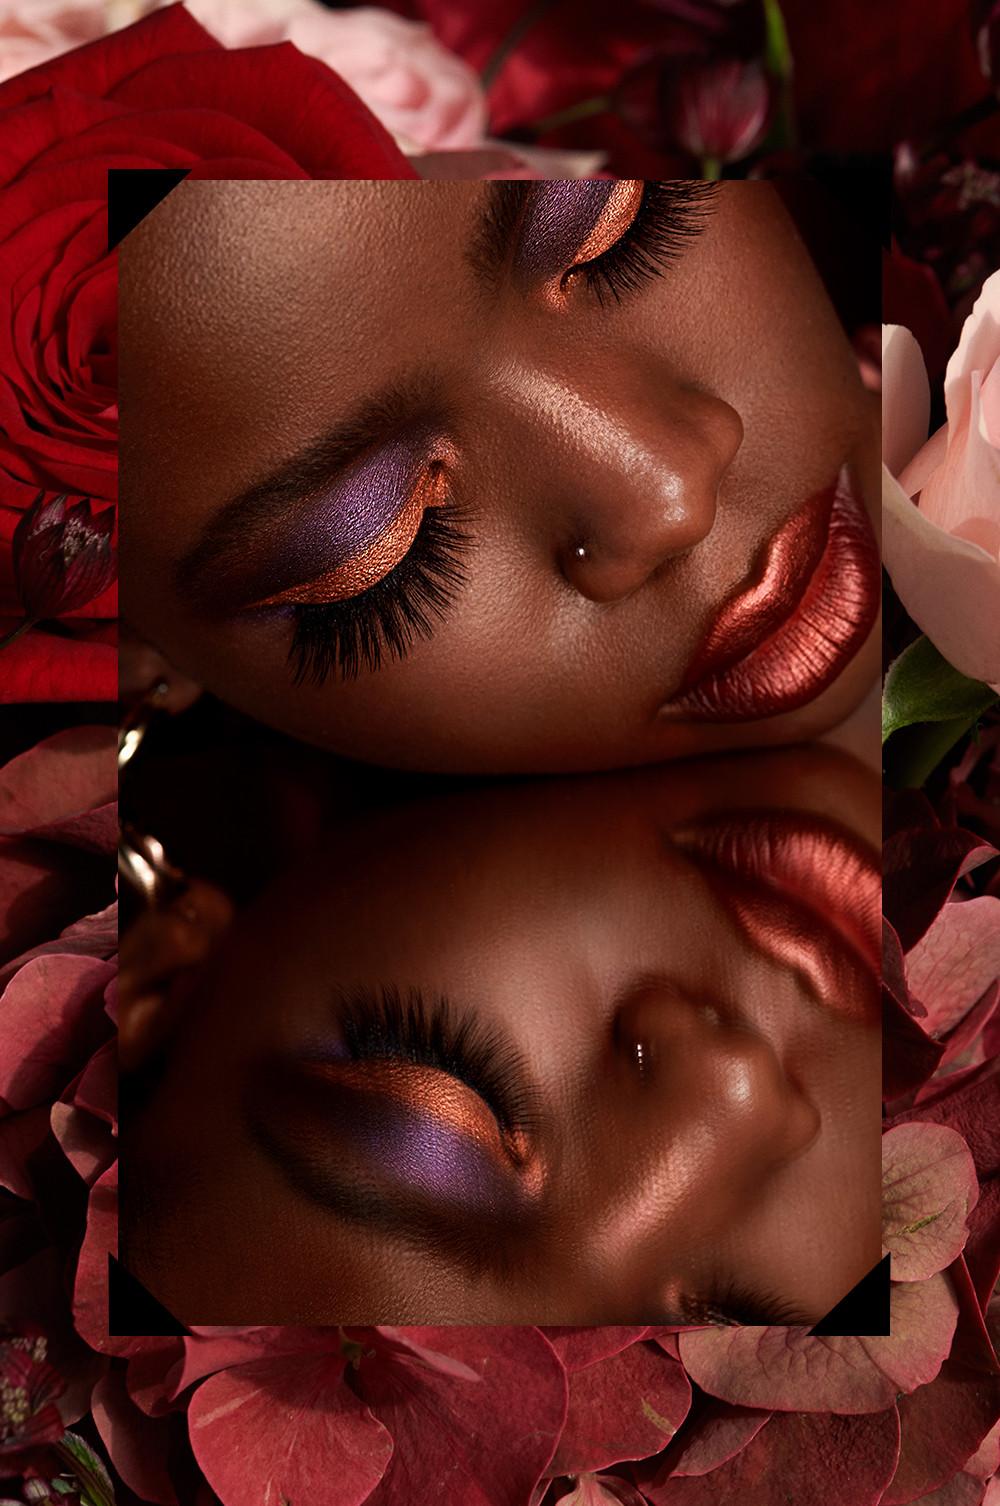 Mirrored image of model in pink and purple eyeshaddow, overlaid on an image of roses